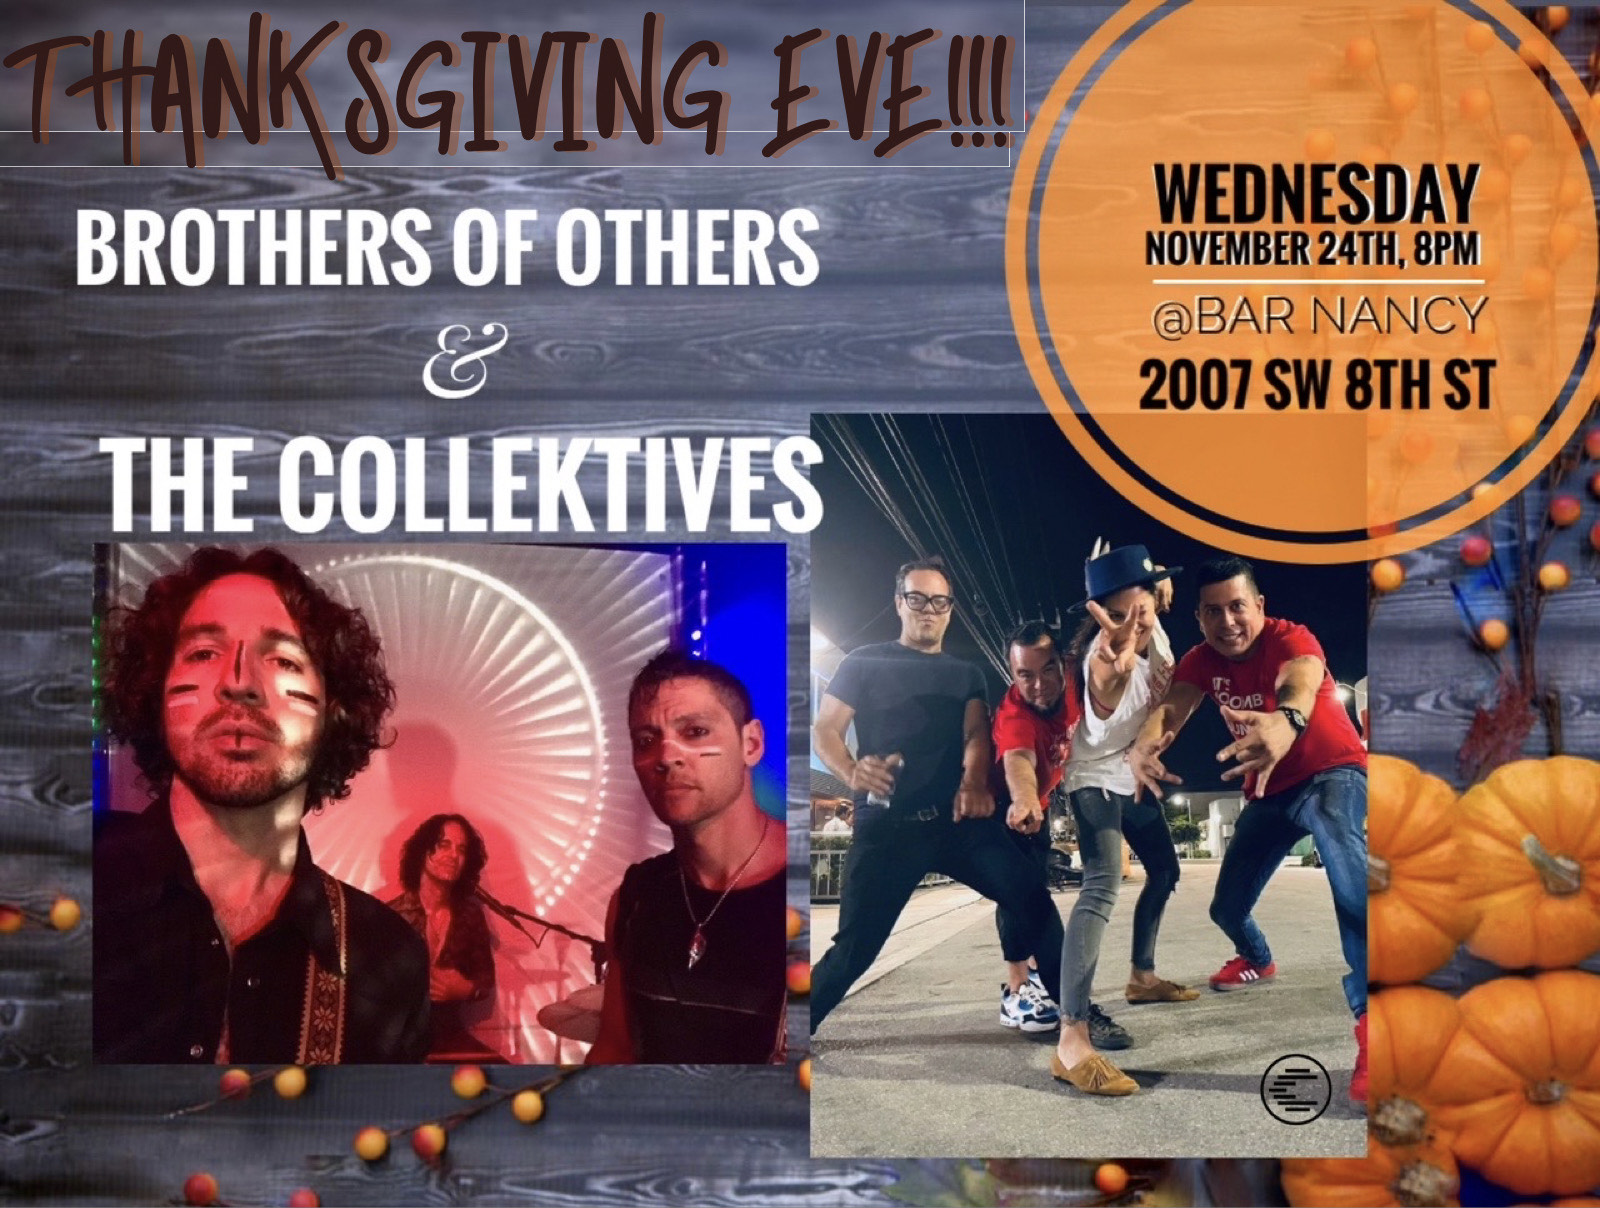 Thanksgiving Eve - Brothers of Others & The Collektives at Bar Nancy - Wednesday Nov 24th - 8PM